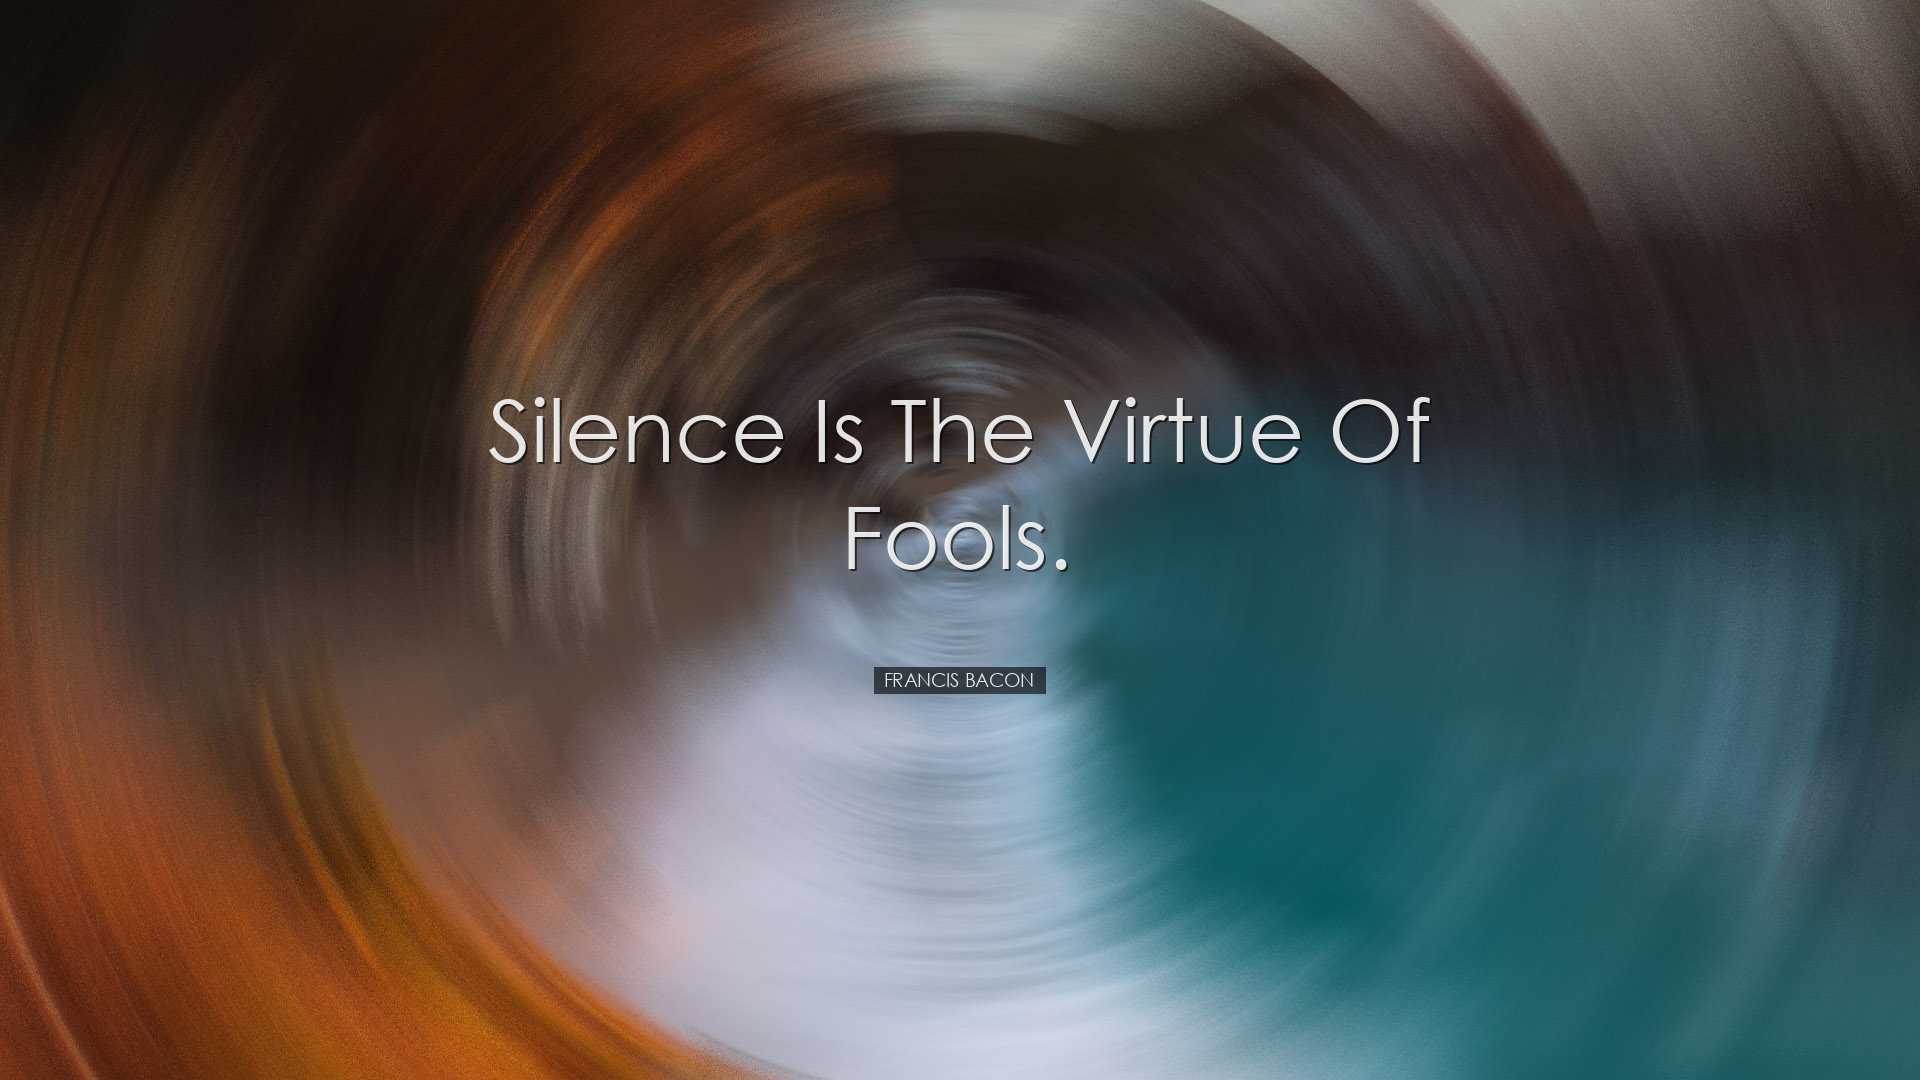 Silence is the virtue of fools. - Francis Bacon